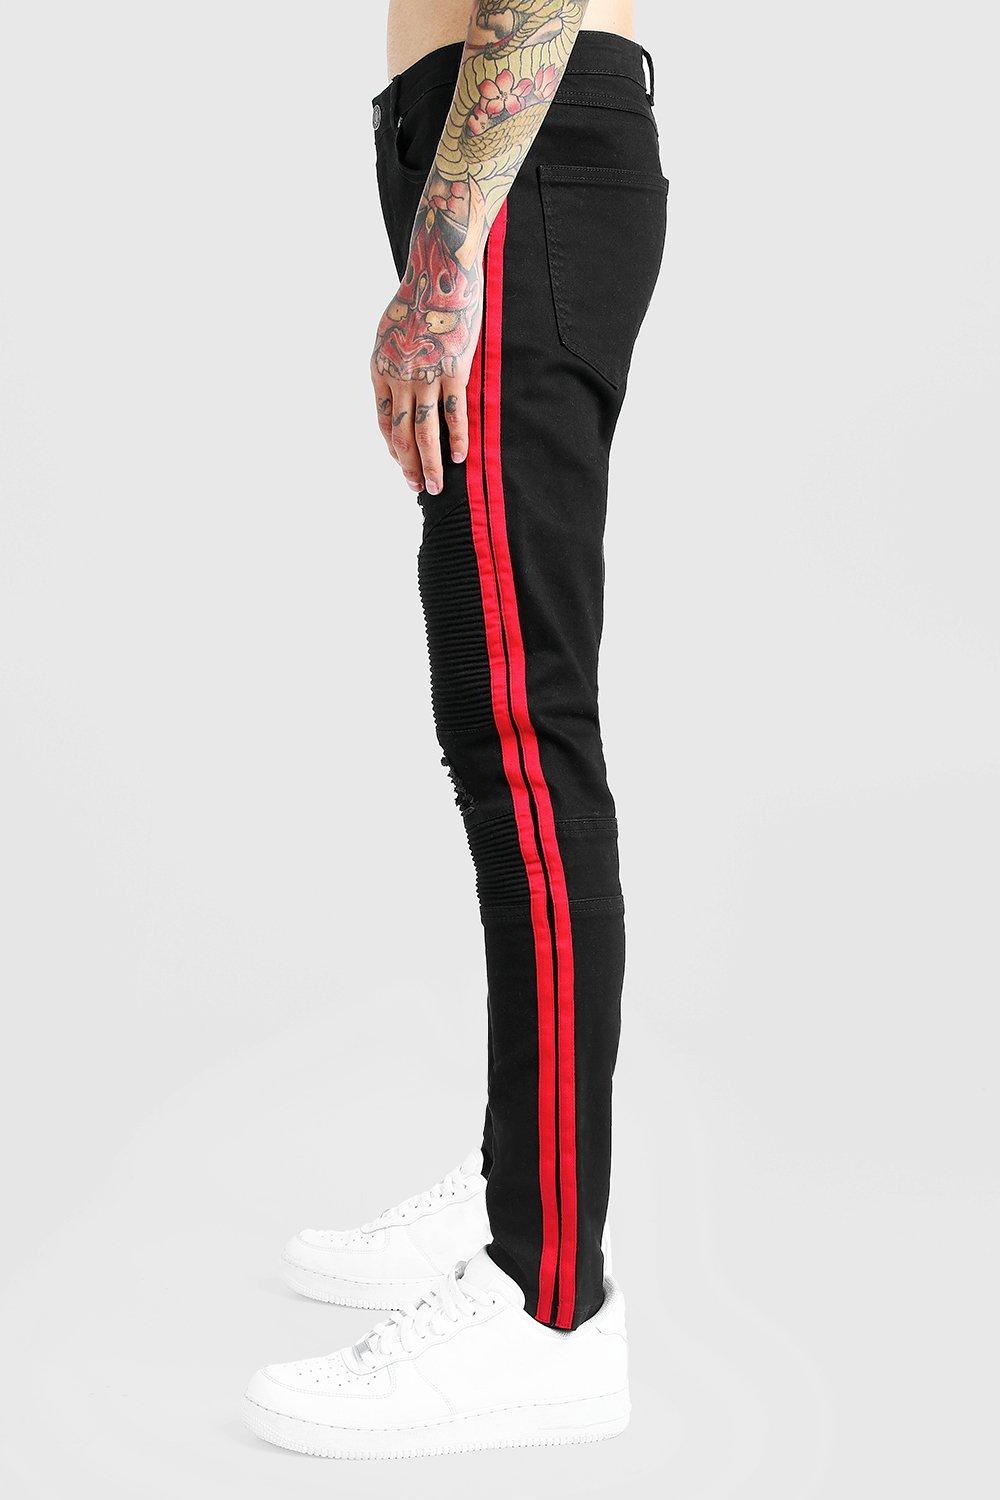 red tape black jeans